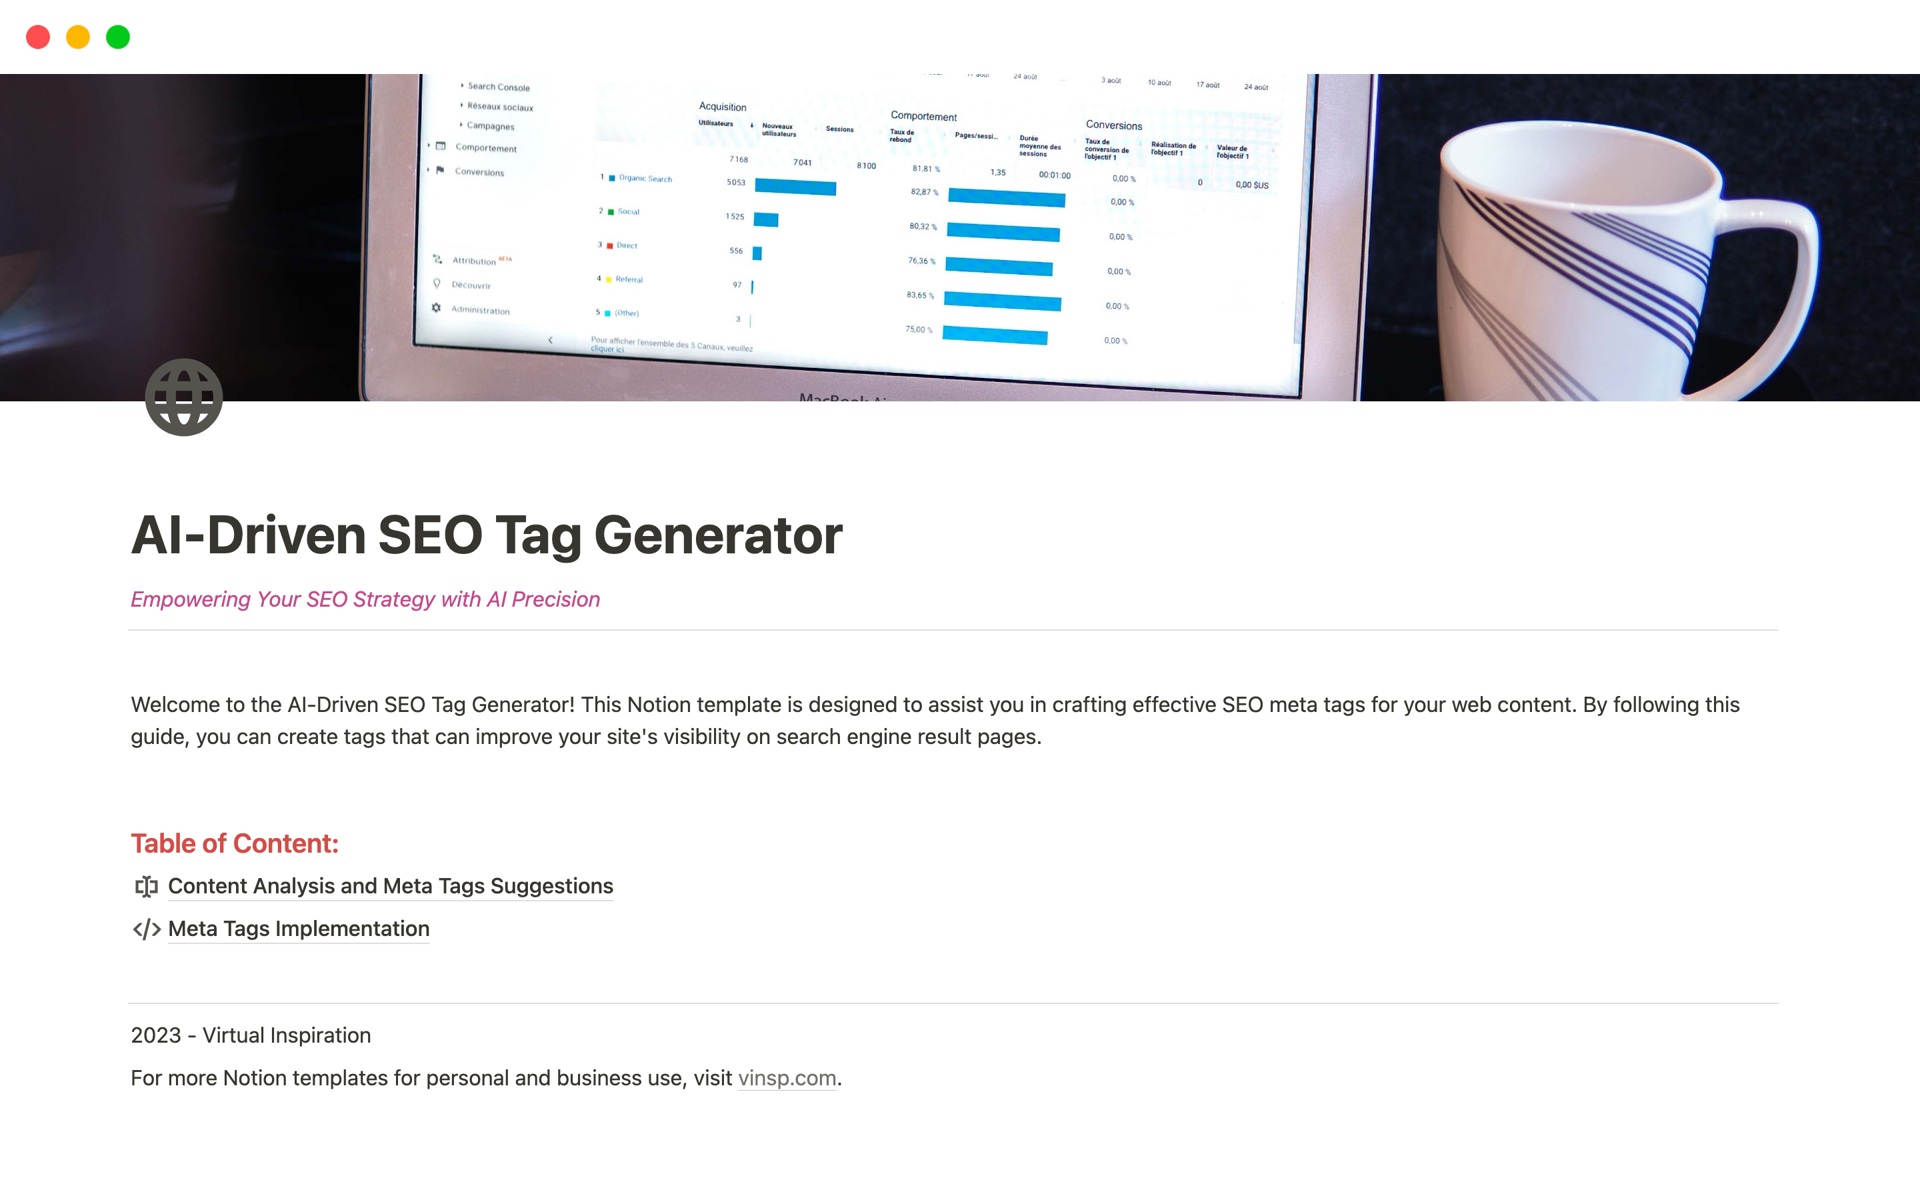 AI-Driven SEO Tag Generator is an intelligent tool that employs AI to optimize your webpage's meta tags, enhancing your SEO strategy and boosting your site's visibility in search engine results.